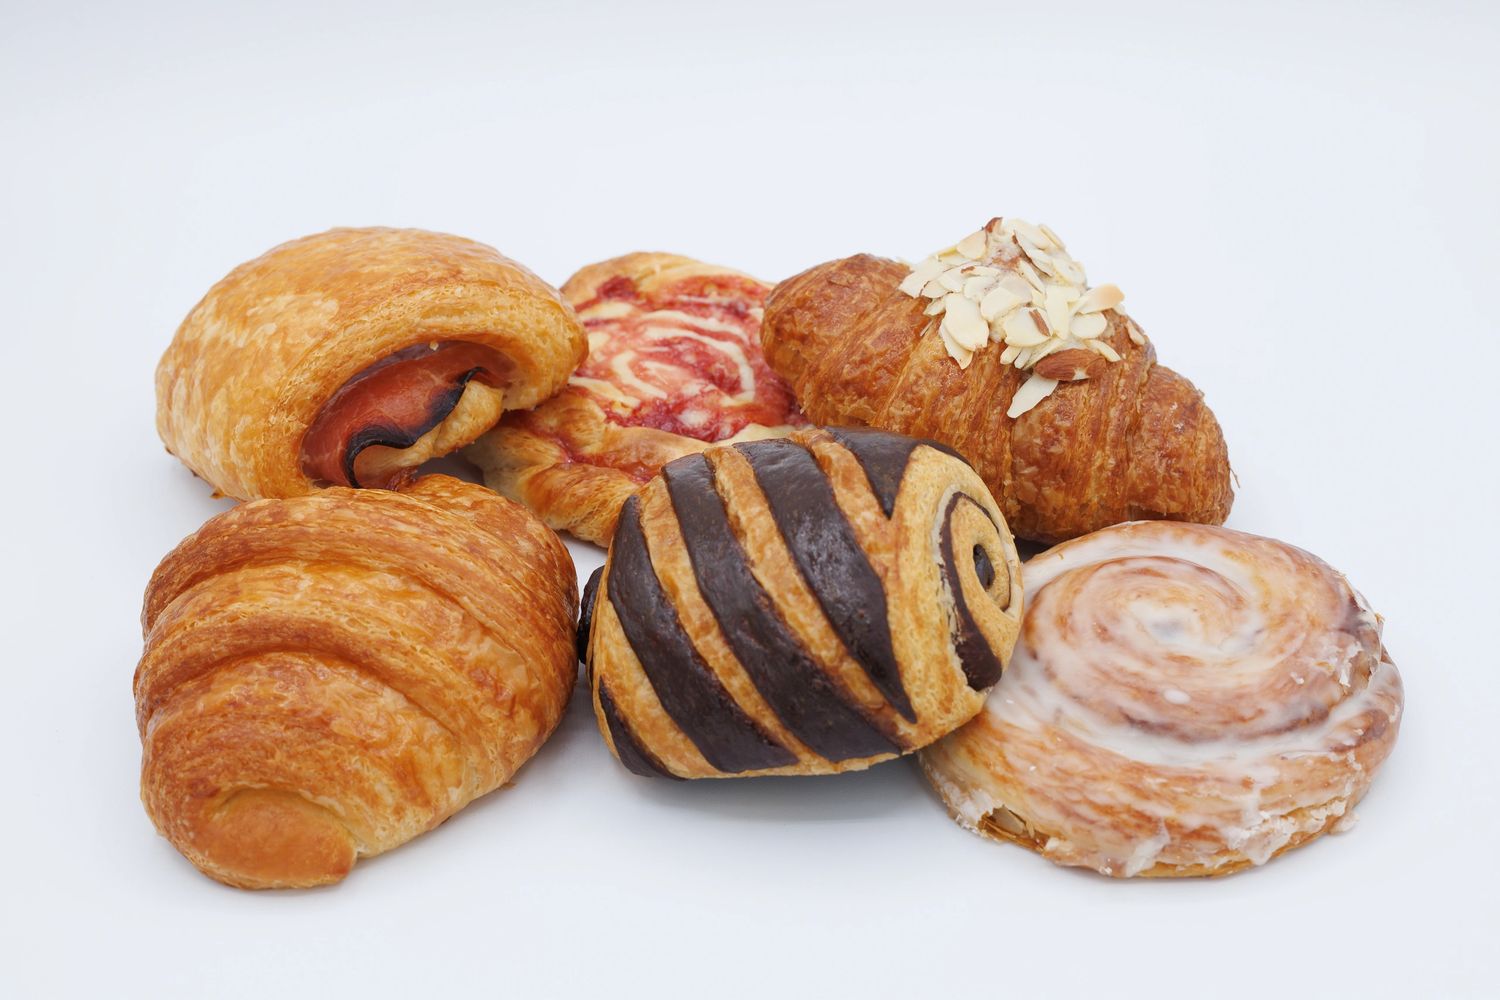 Croissants and Pastries